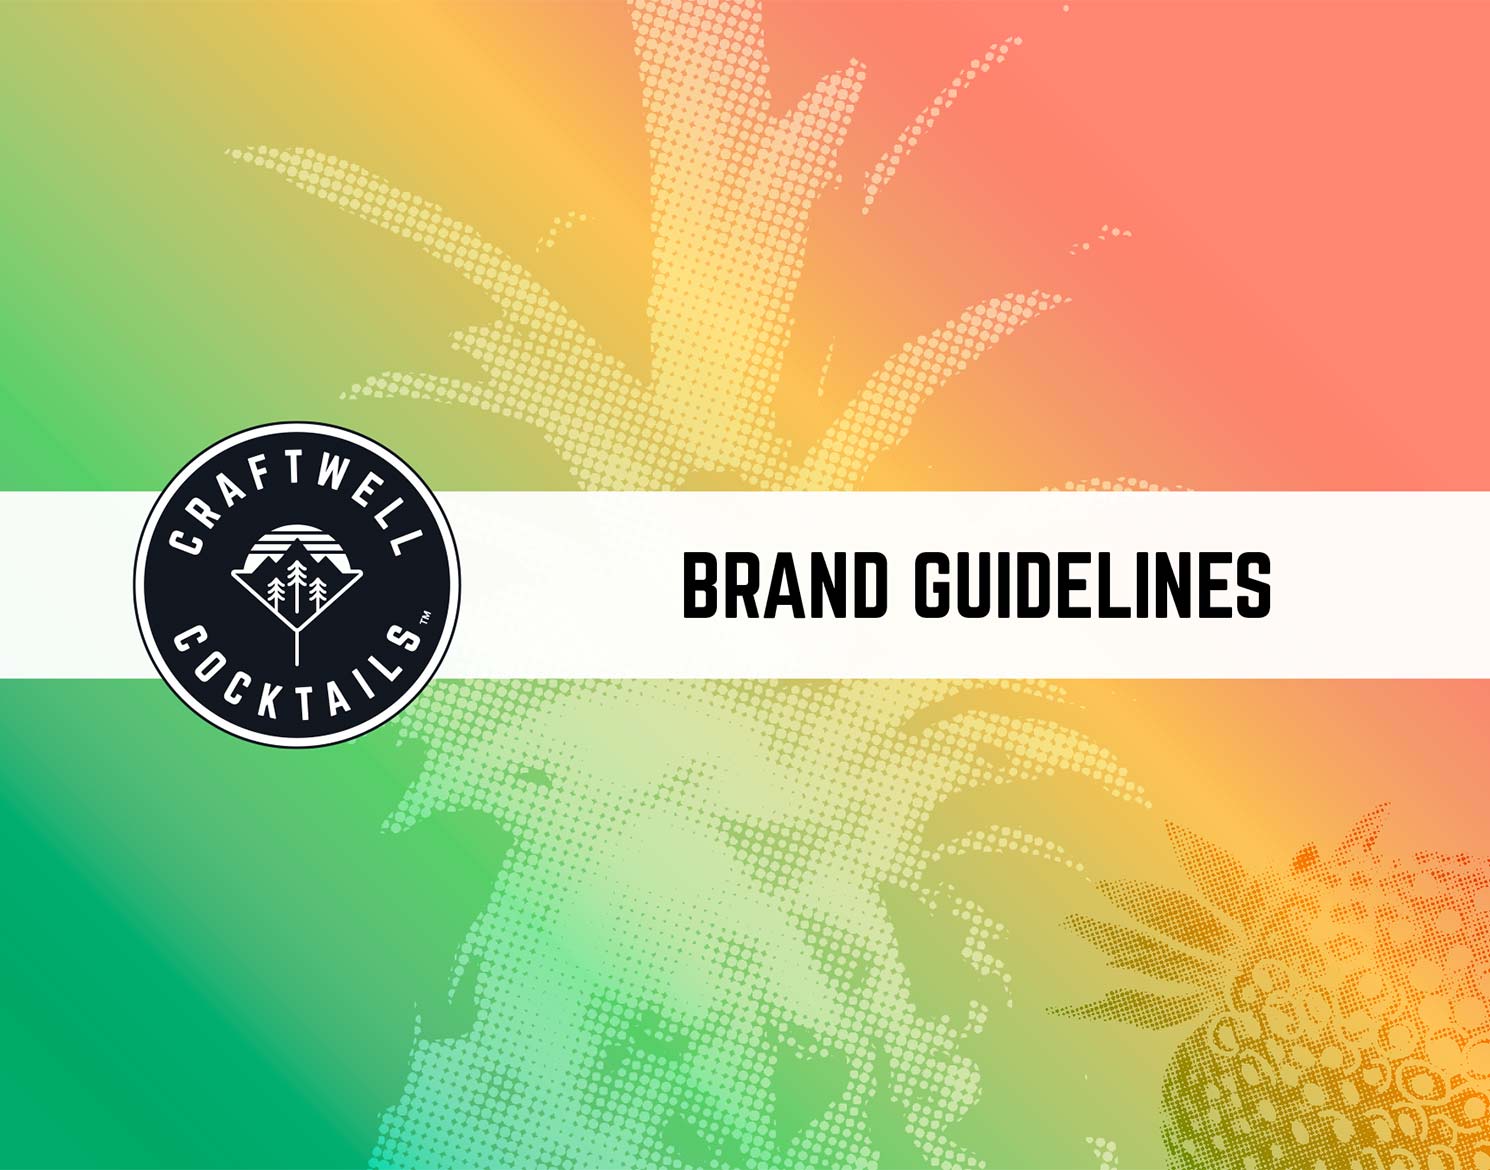 Craftwell Cocktails brand guidelines cover page